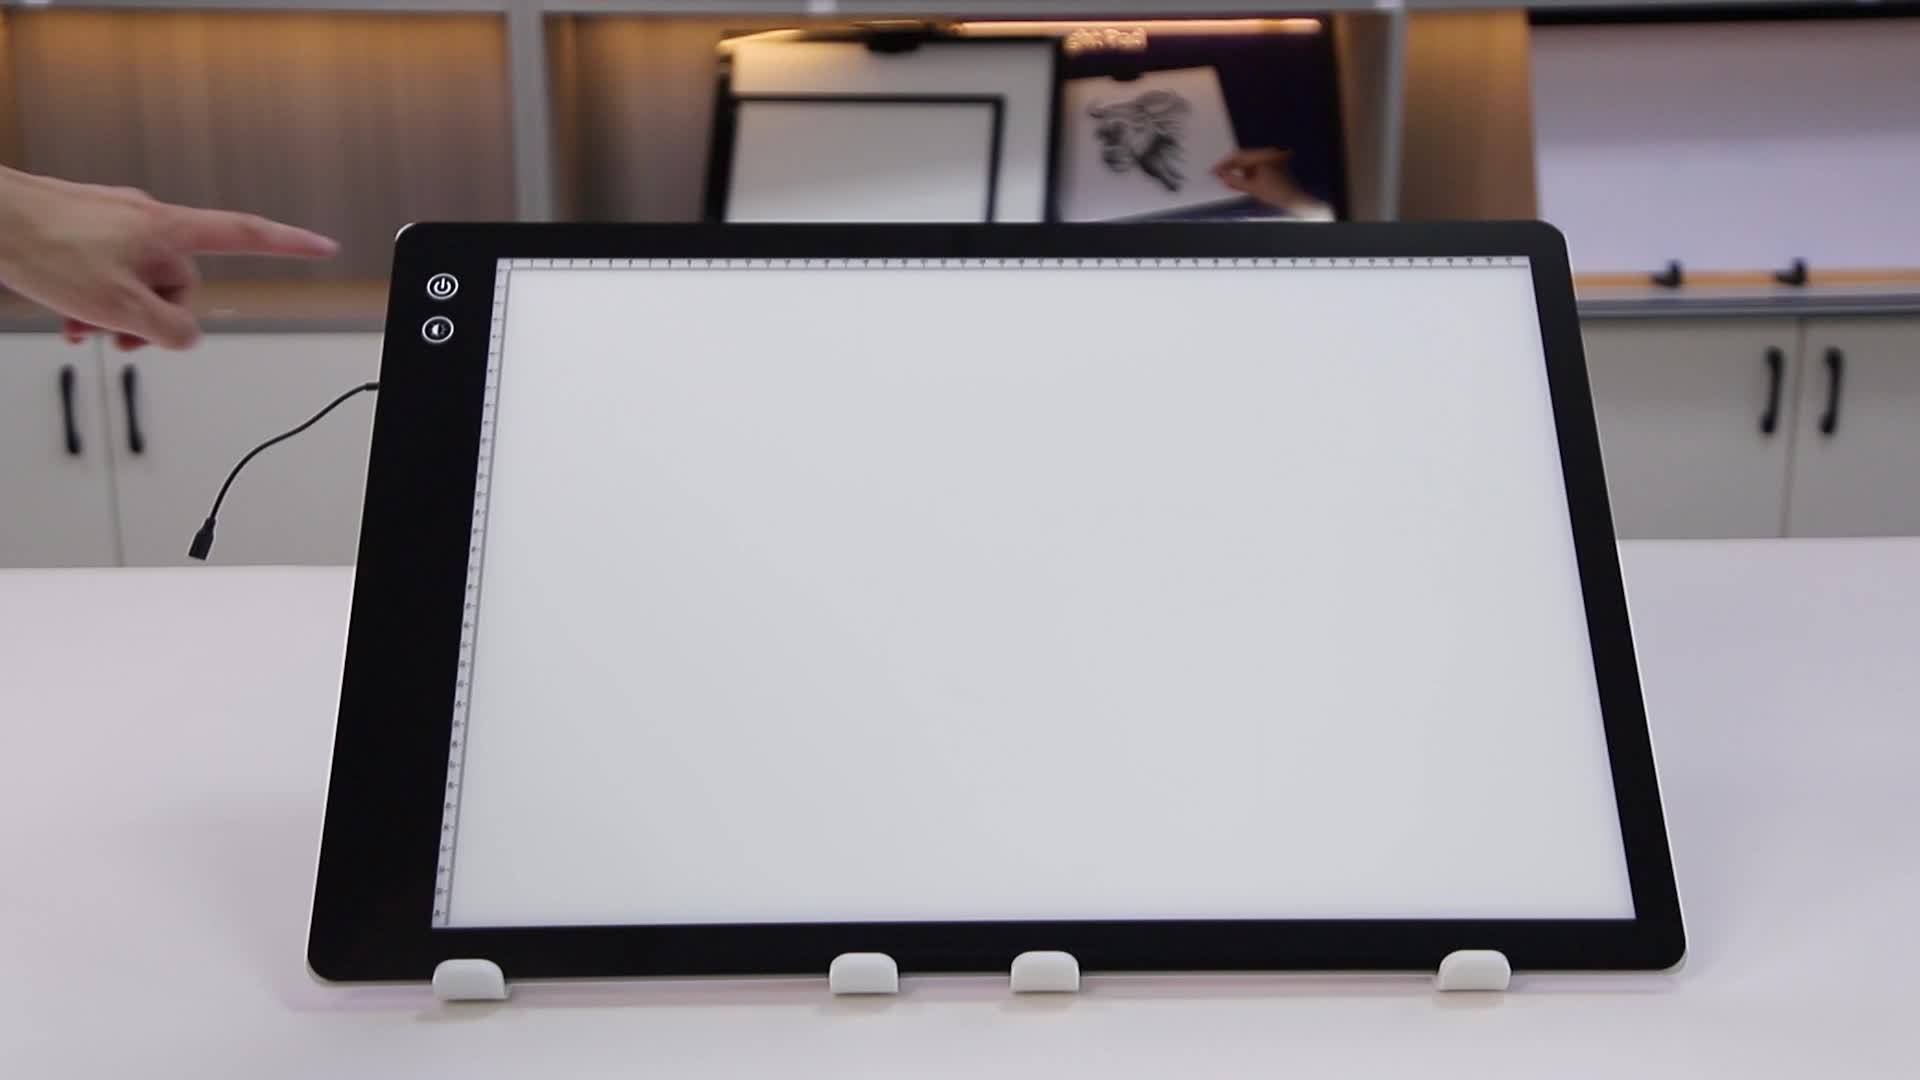 A4 Wireless Led Light Box With Innovative Stand And Top Clip - Temu